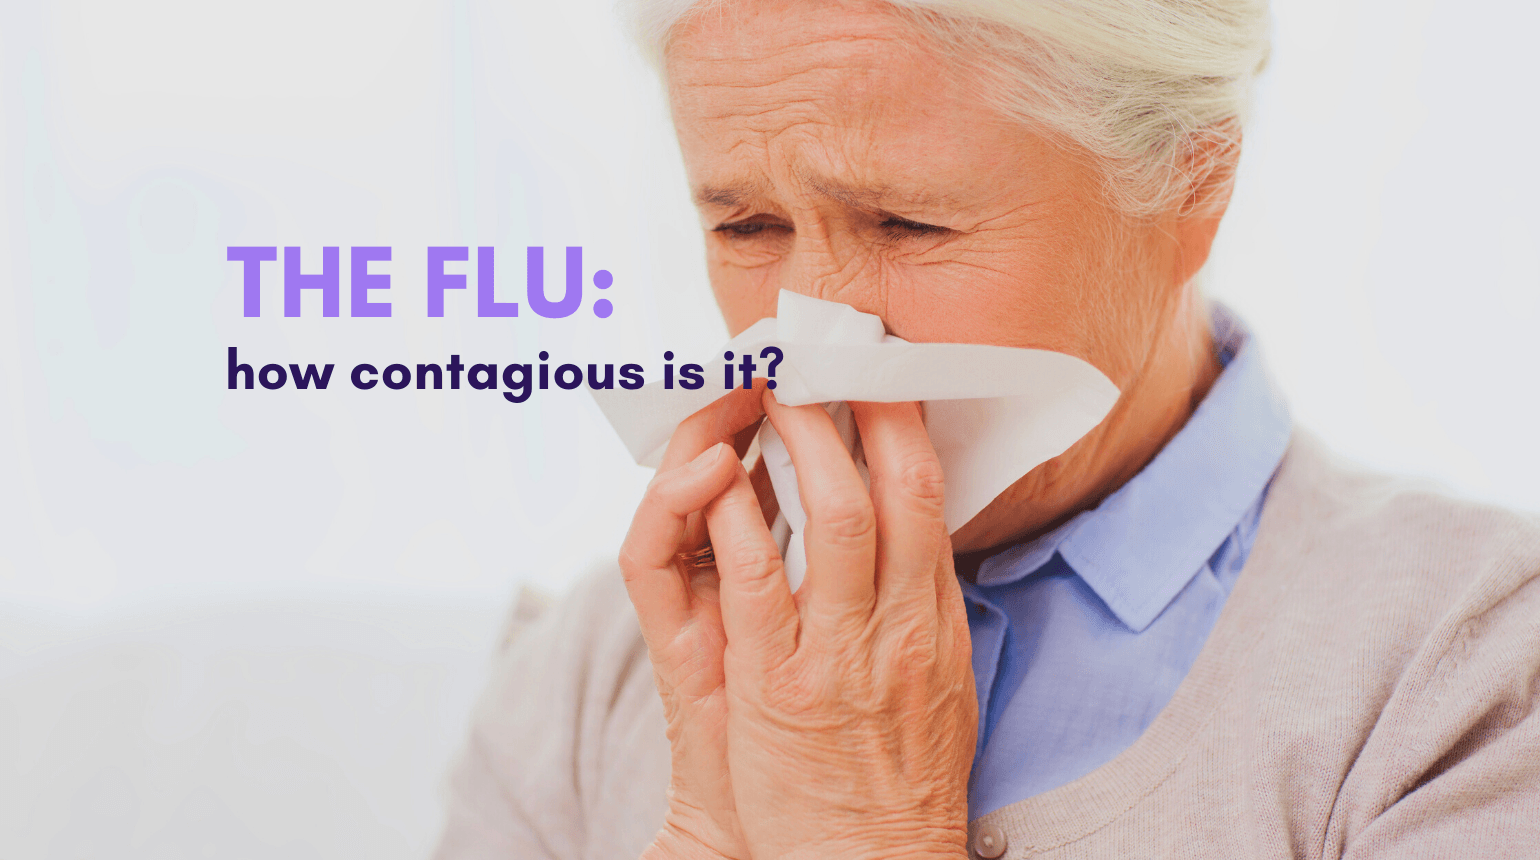 How long is the flu contagious